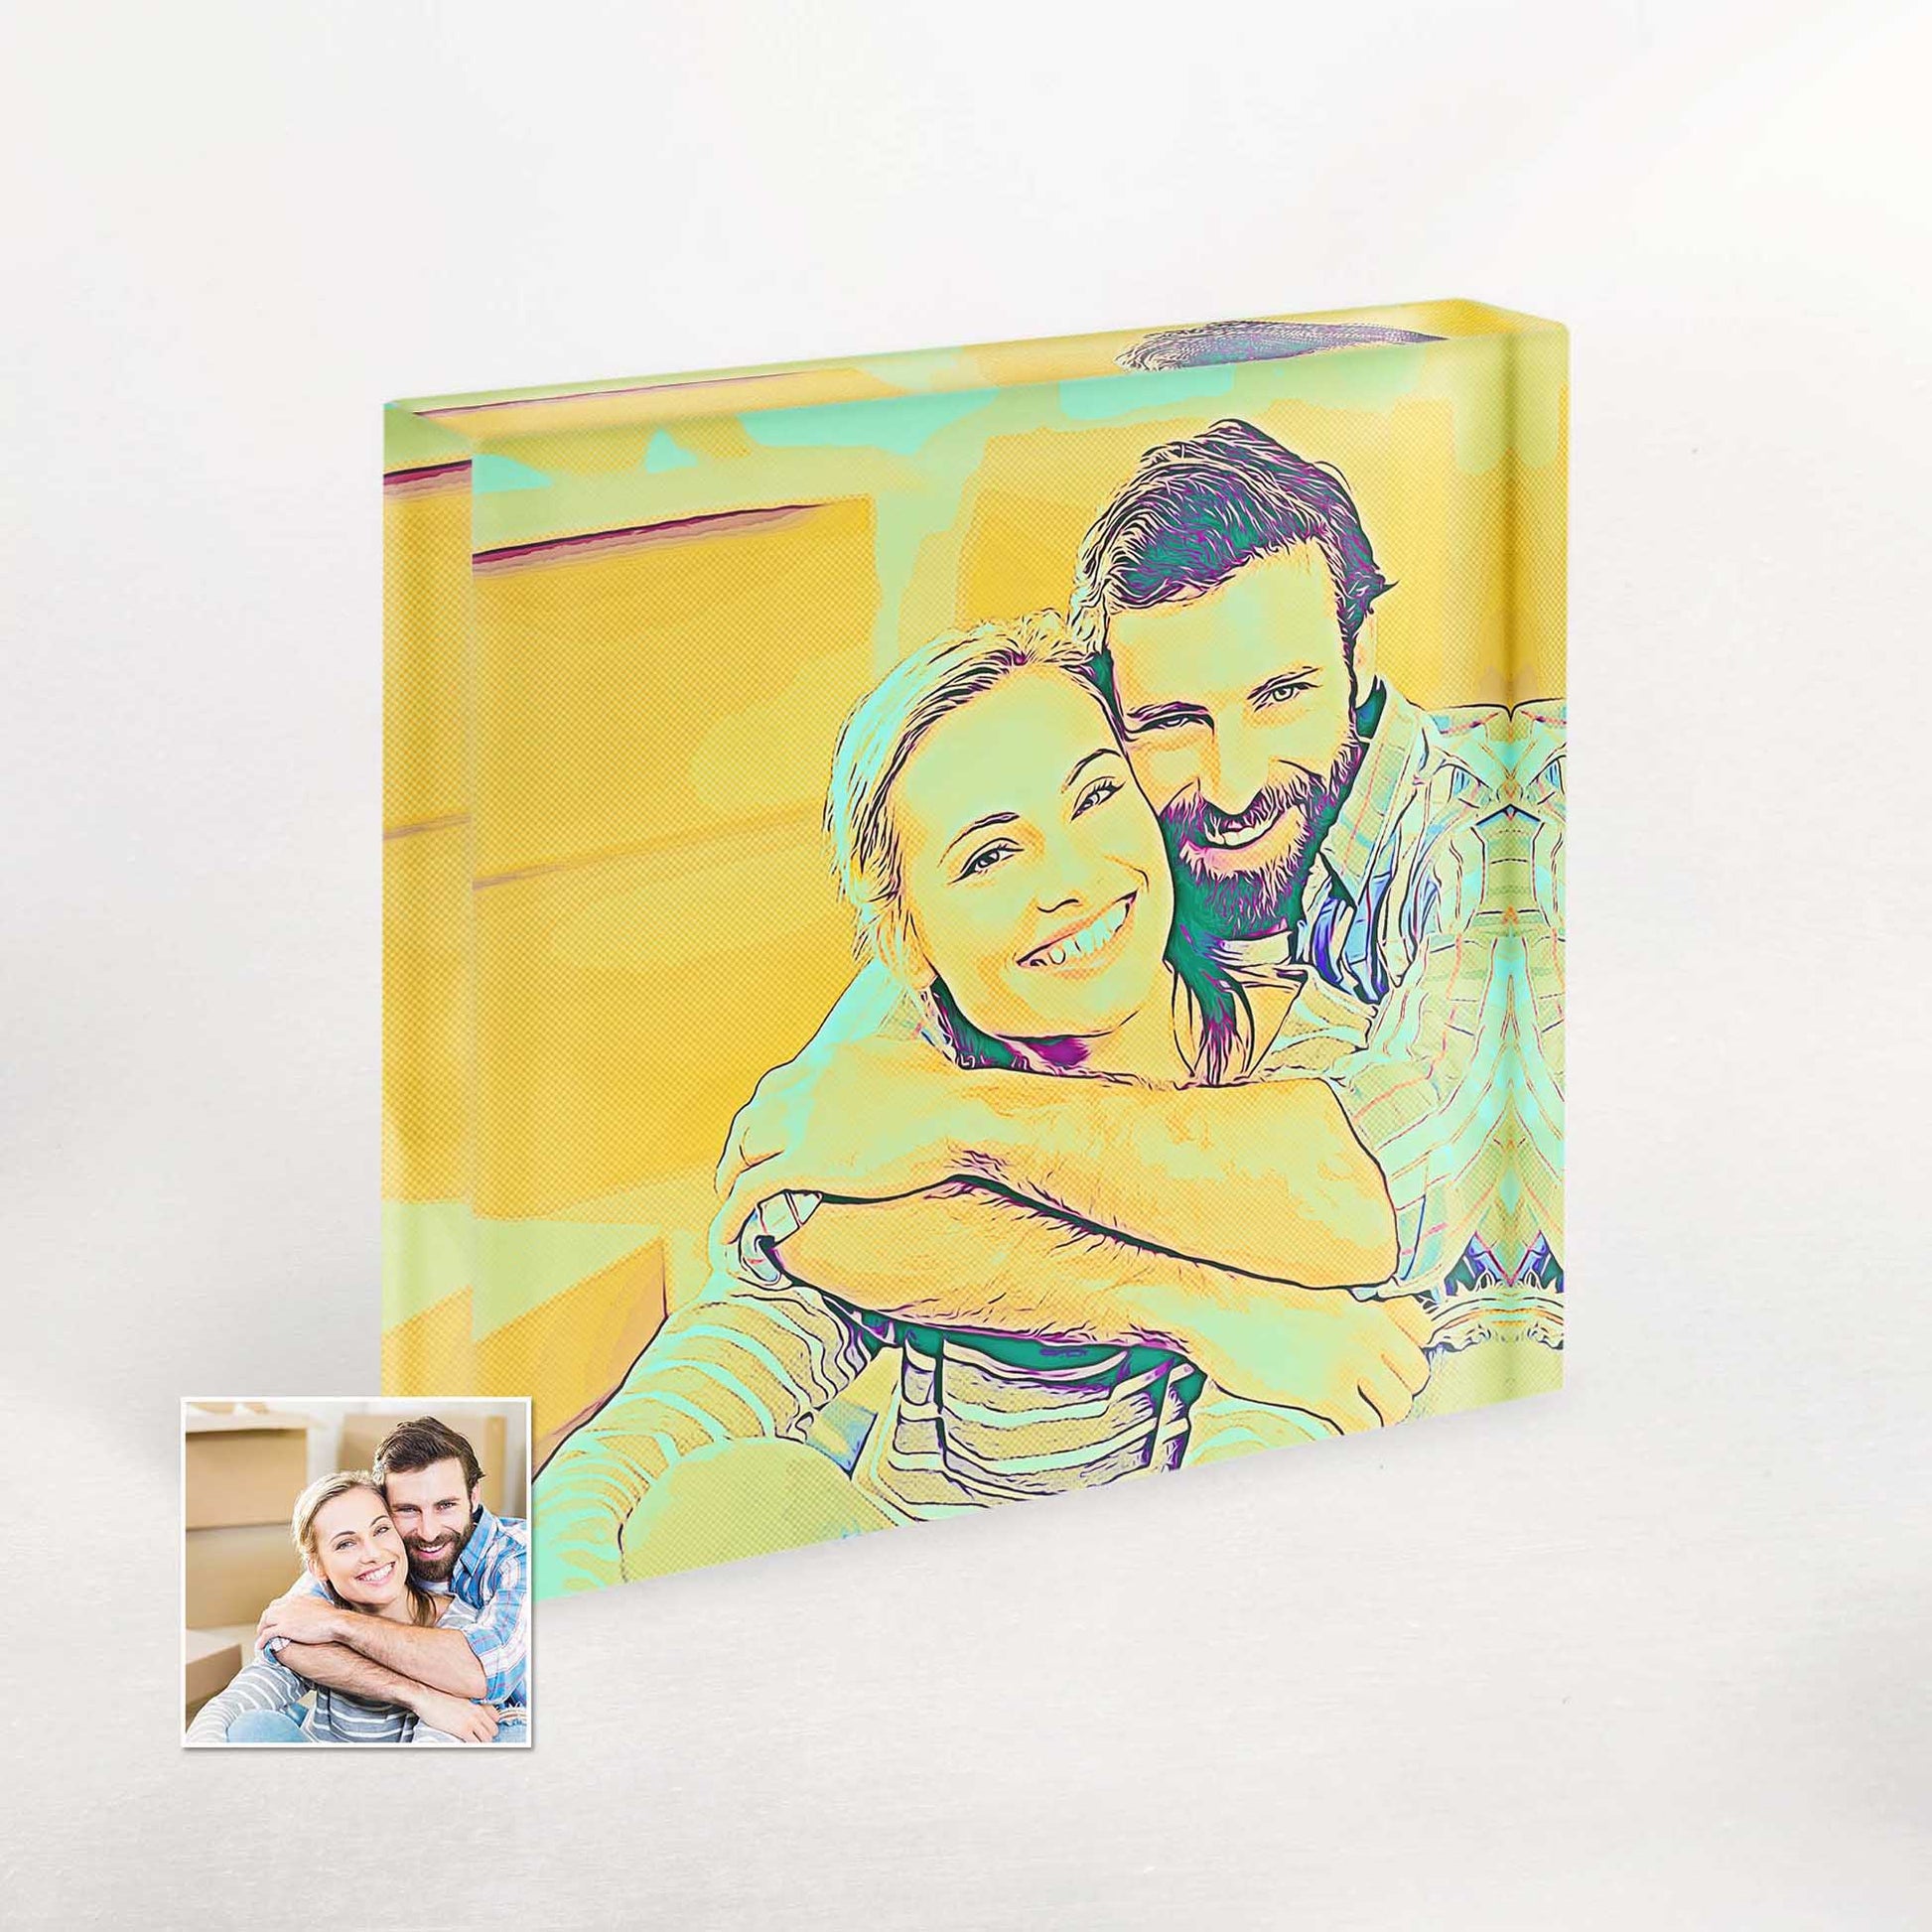 Celebrate love and laughter with our Personalised Blue and Yellow Cartoon Acrylic Block Photo. This fun and inspirational gift idea is sure to brighten up any anniversary, bringing joy and a touch of whimsy to the celebration with family and friends.